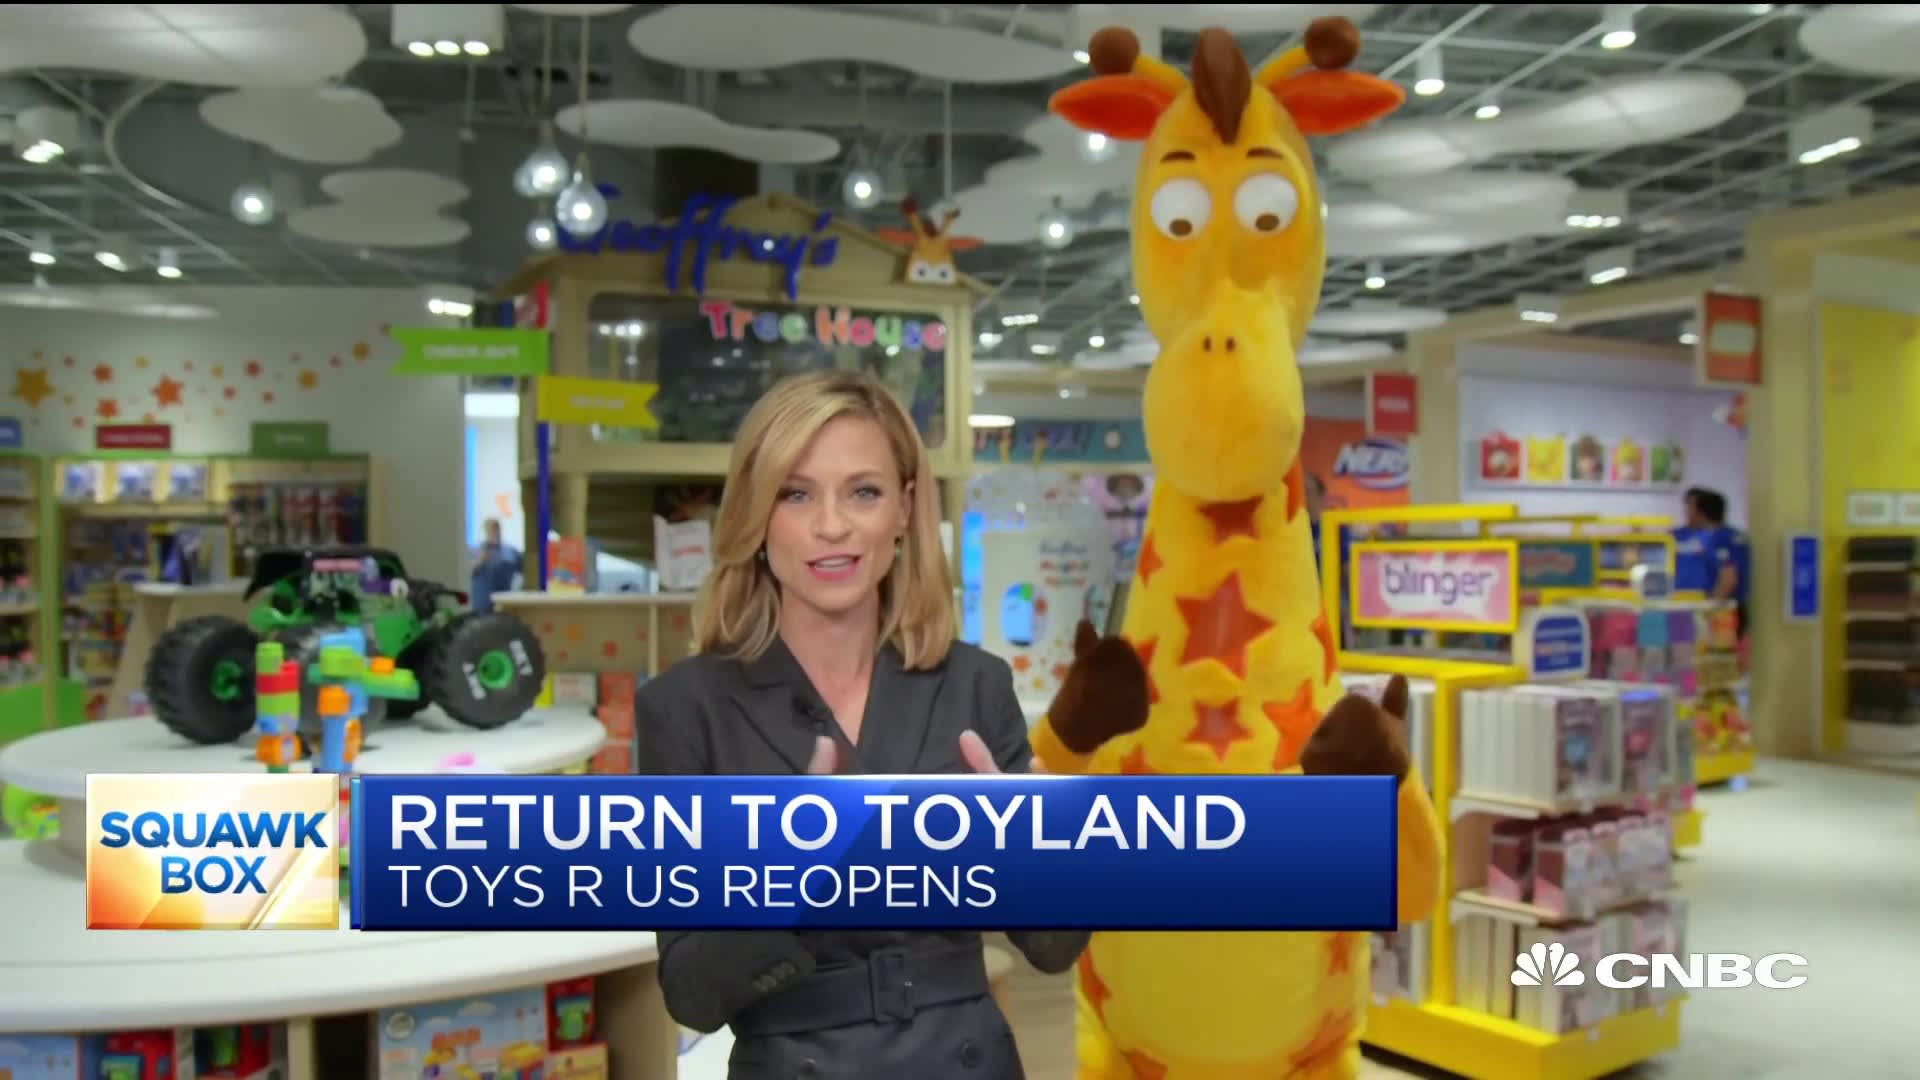 toys r us news update